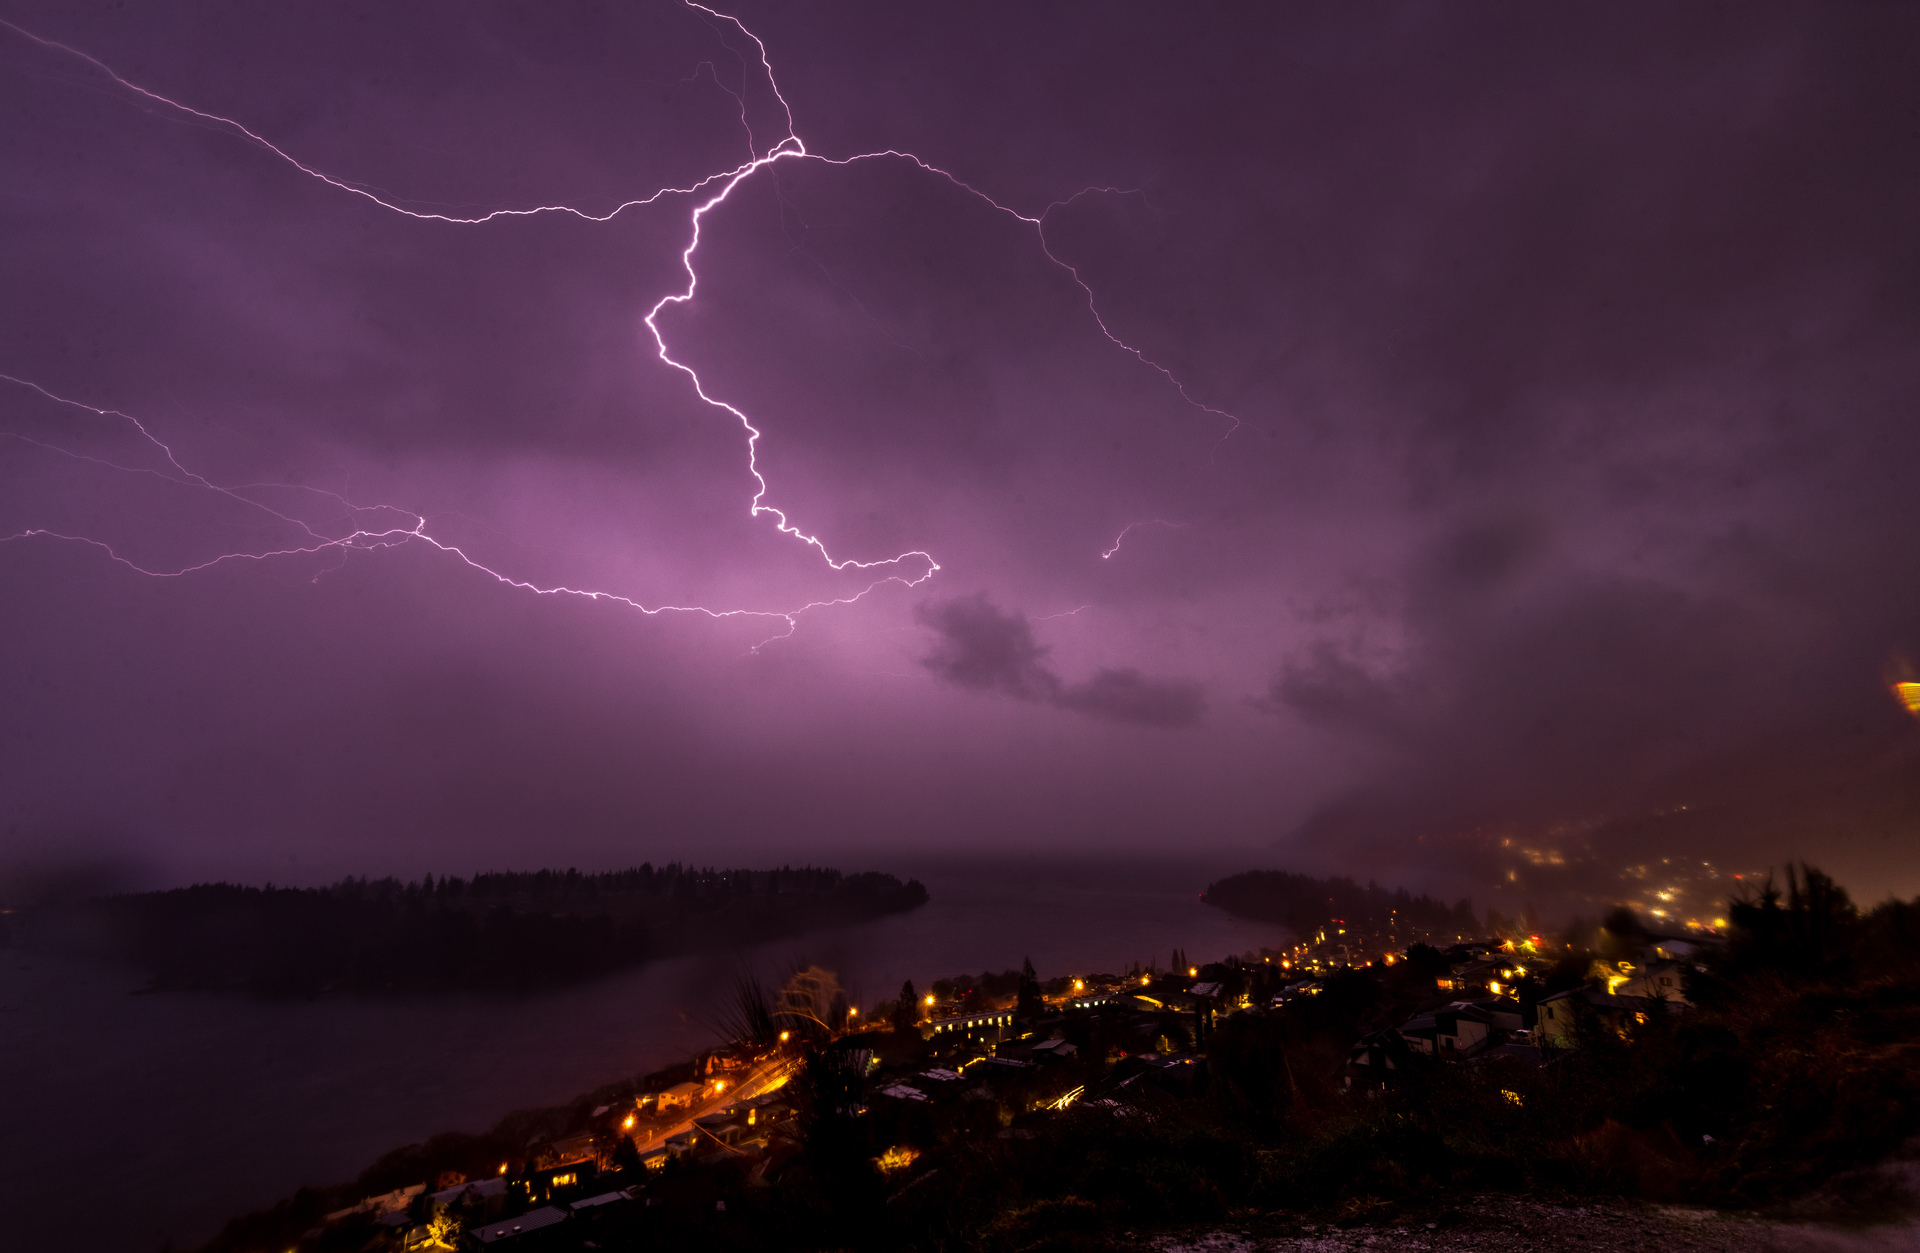 Facts About Thunderstorms for Kids - The Edvocate